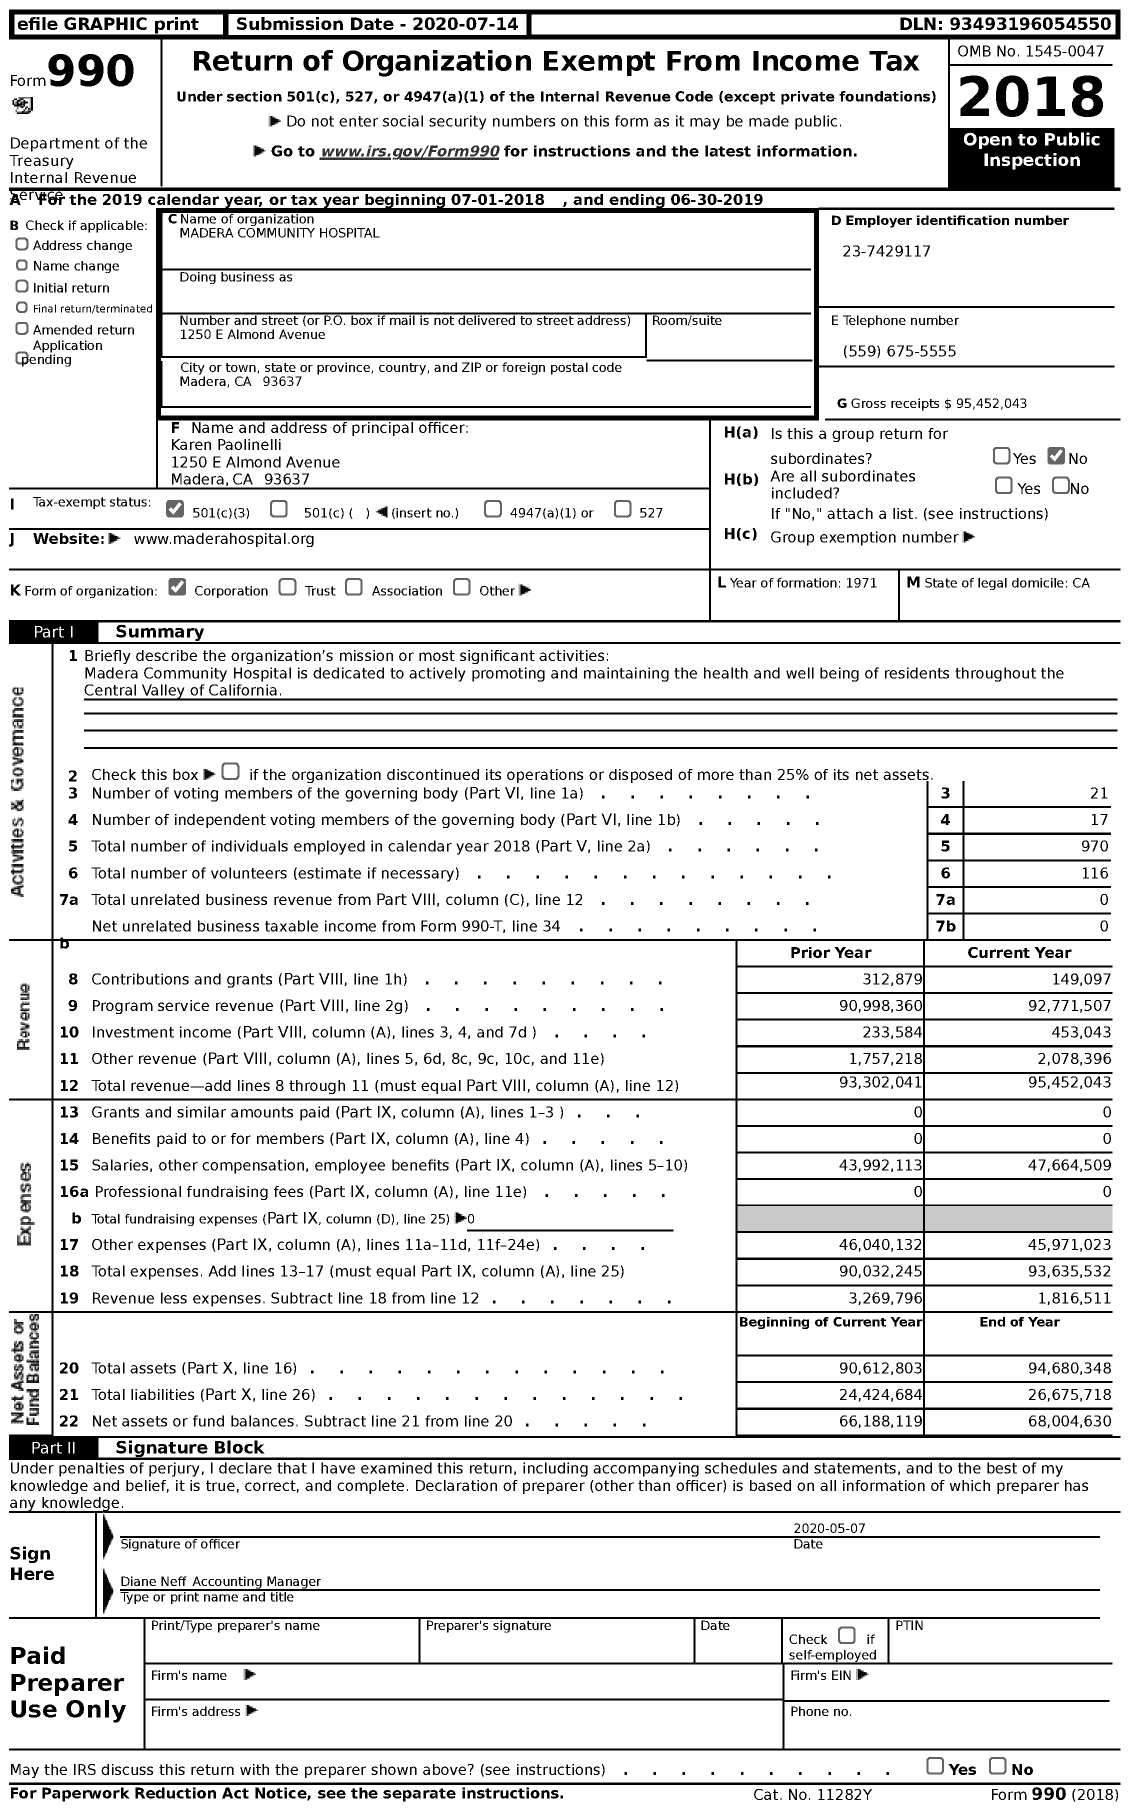 Image of first page of 2018 Form 990 for Madera Community Hospital (MCH)